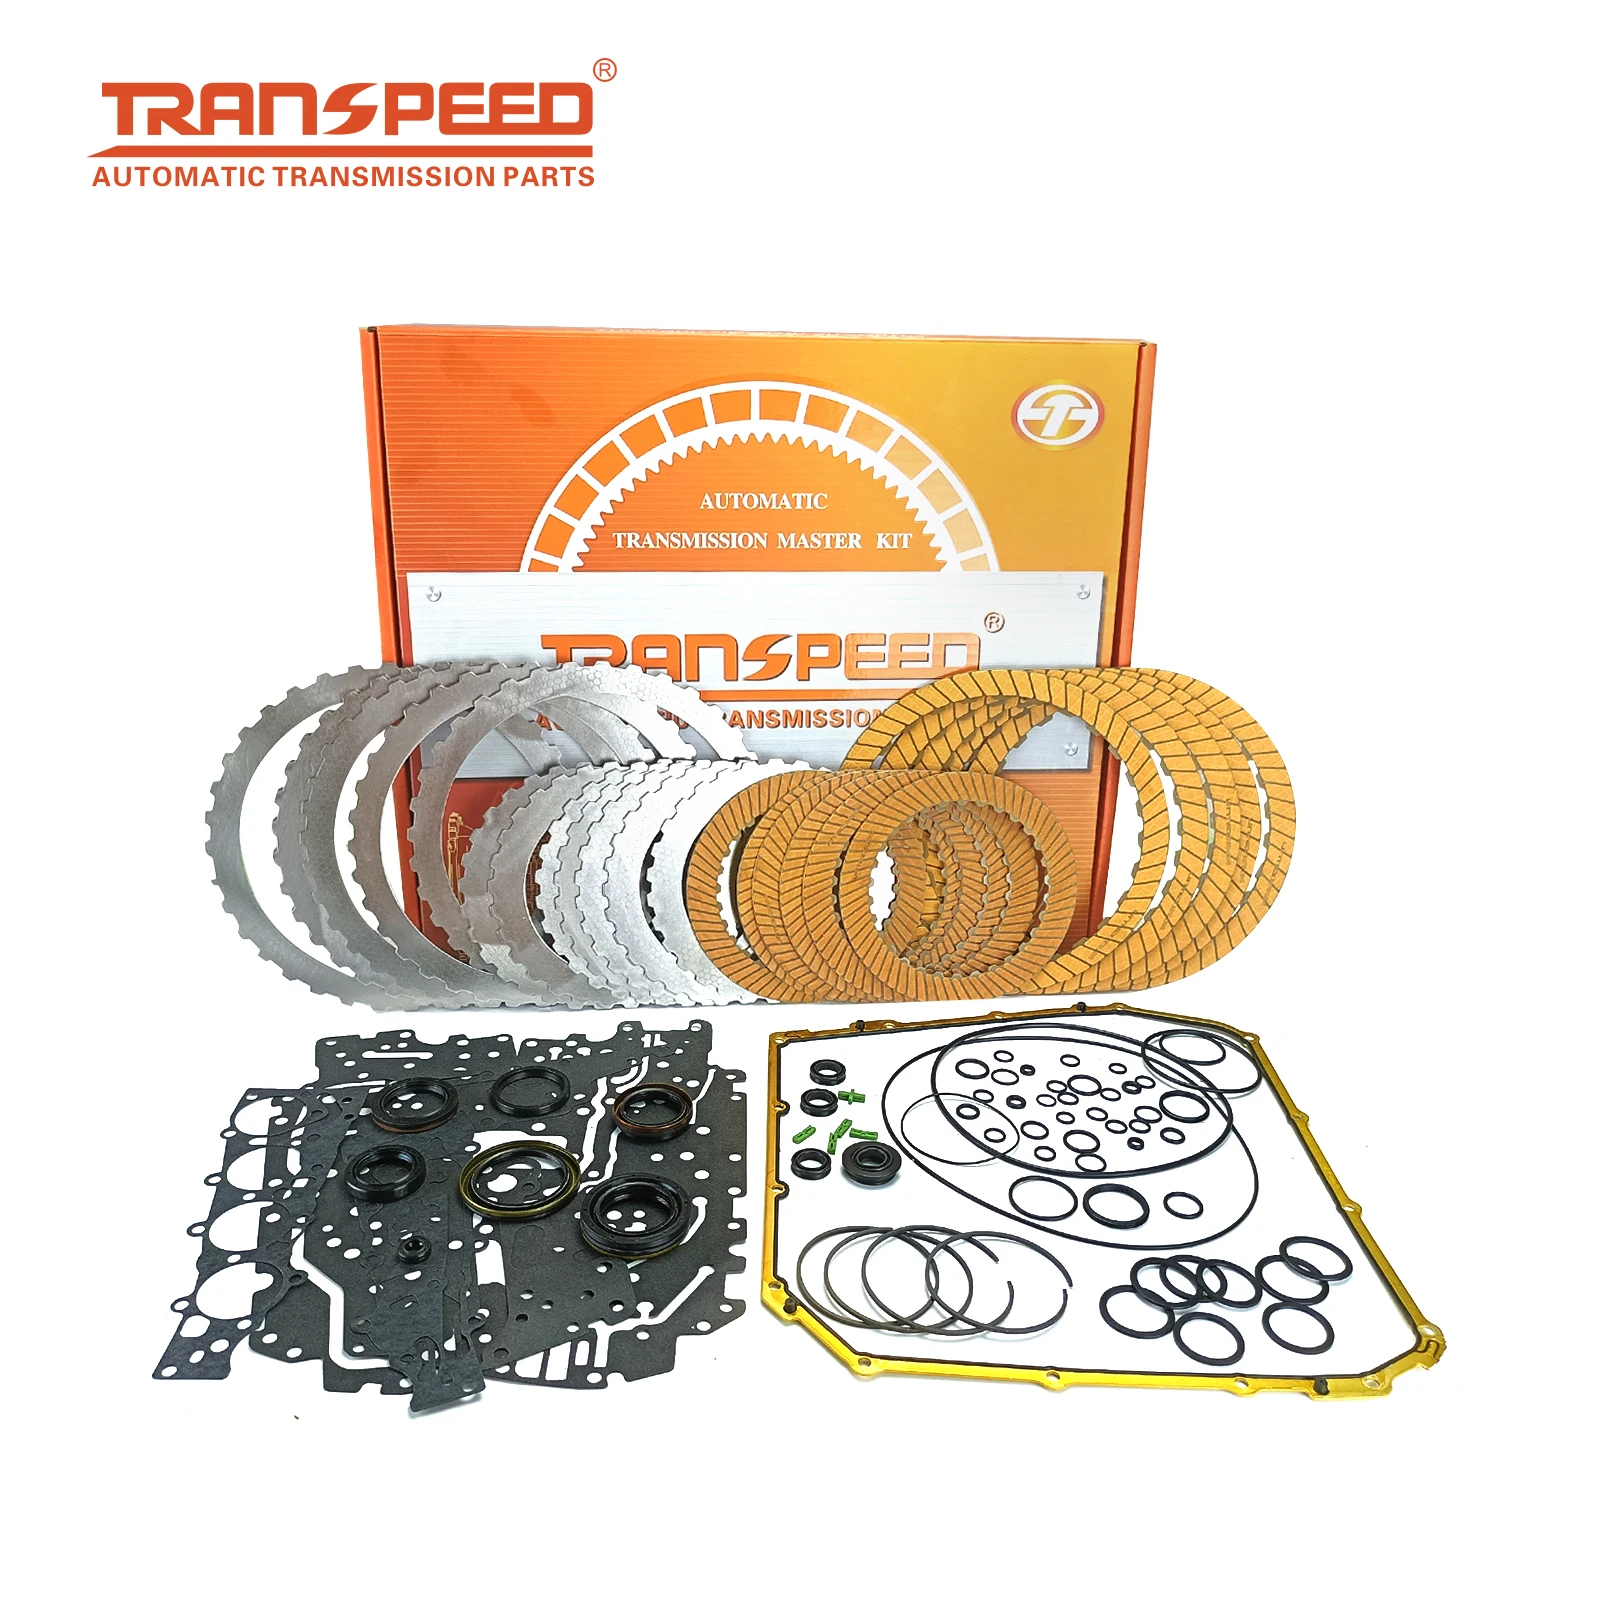 

TRANSPEED 0B5 DL501 Automatic Transmission Gearbox Rebuild Master Gesket Kit For AUDI A4 A5 A6 A7 Q5 PORSCHE Car Accessories